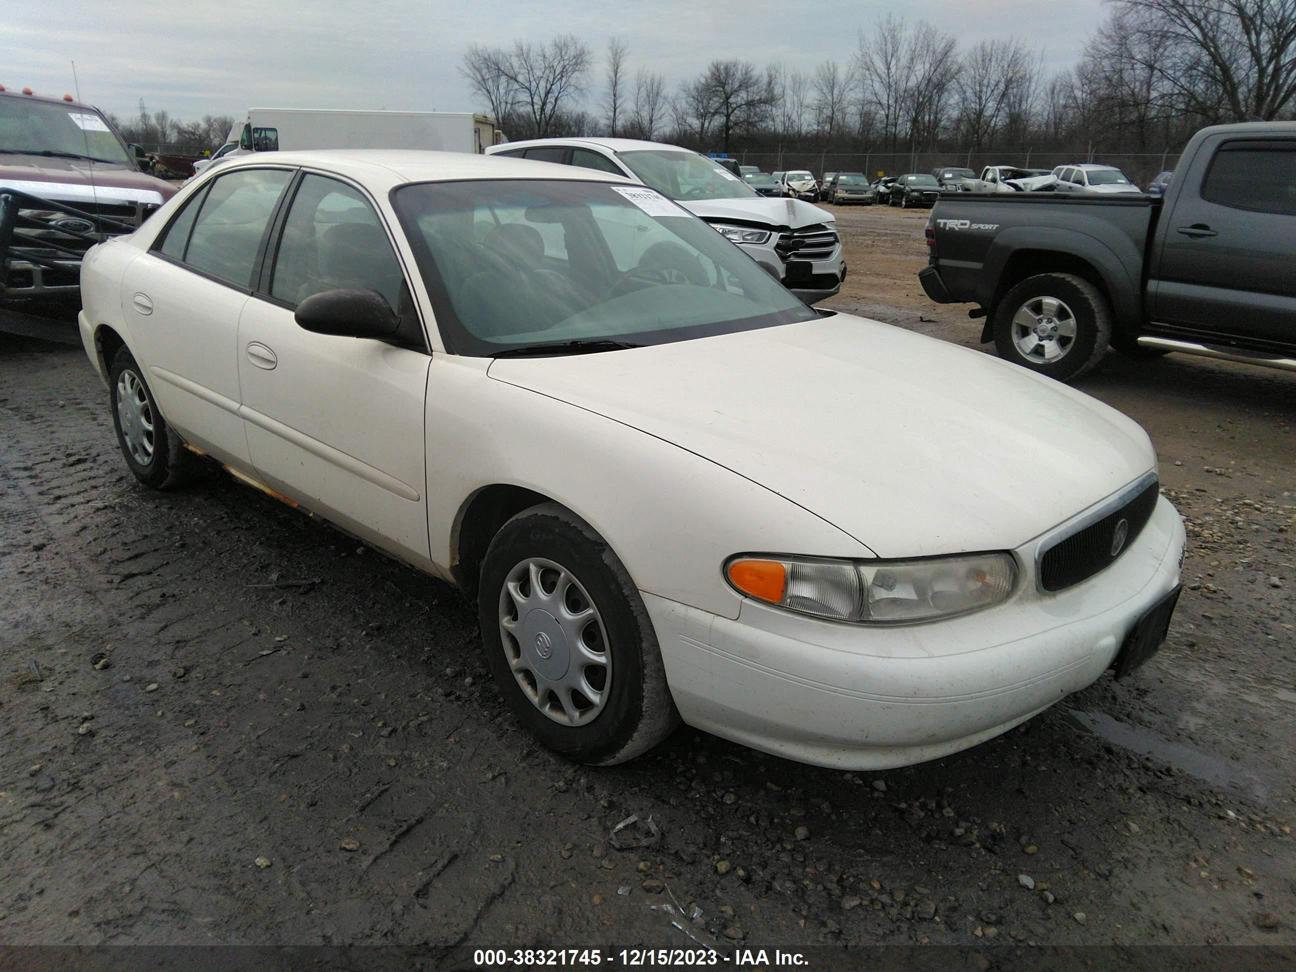 vin: 2G4WS52JX41233784 2G4WS52JX41233784 2004 buick century 3100 for Sale in 54914, 2591 S Casaloma Dr, Appleton, USA